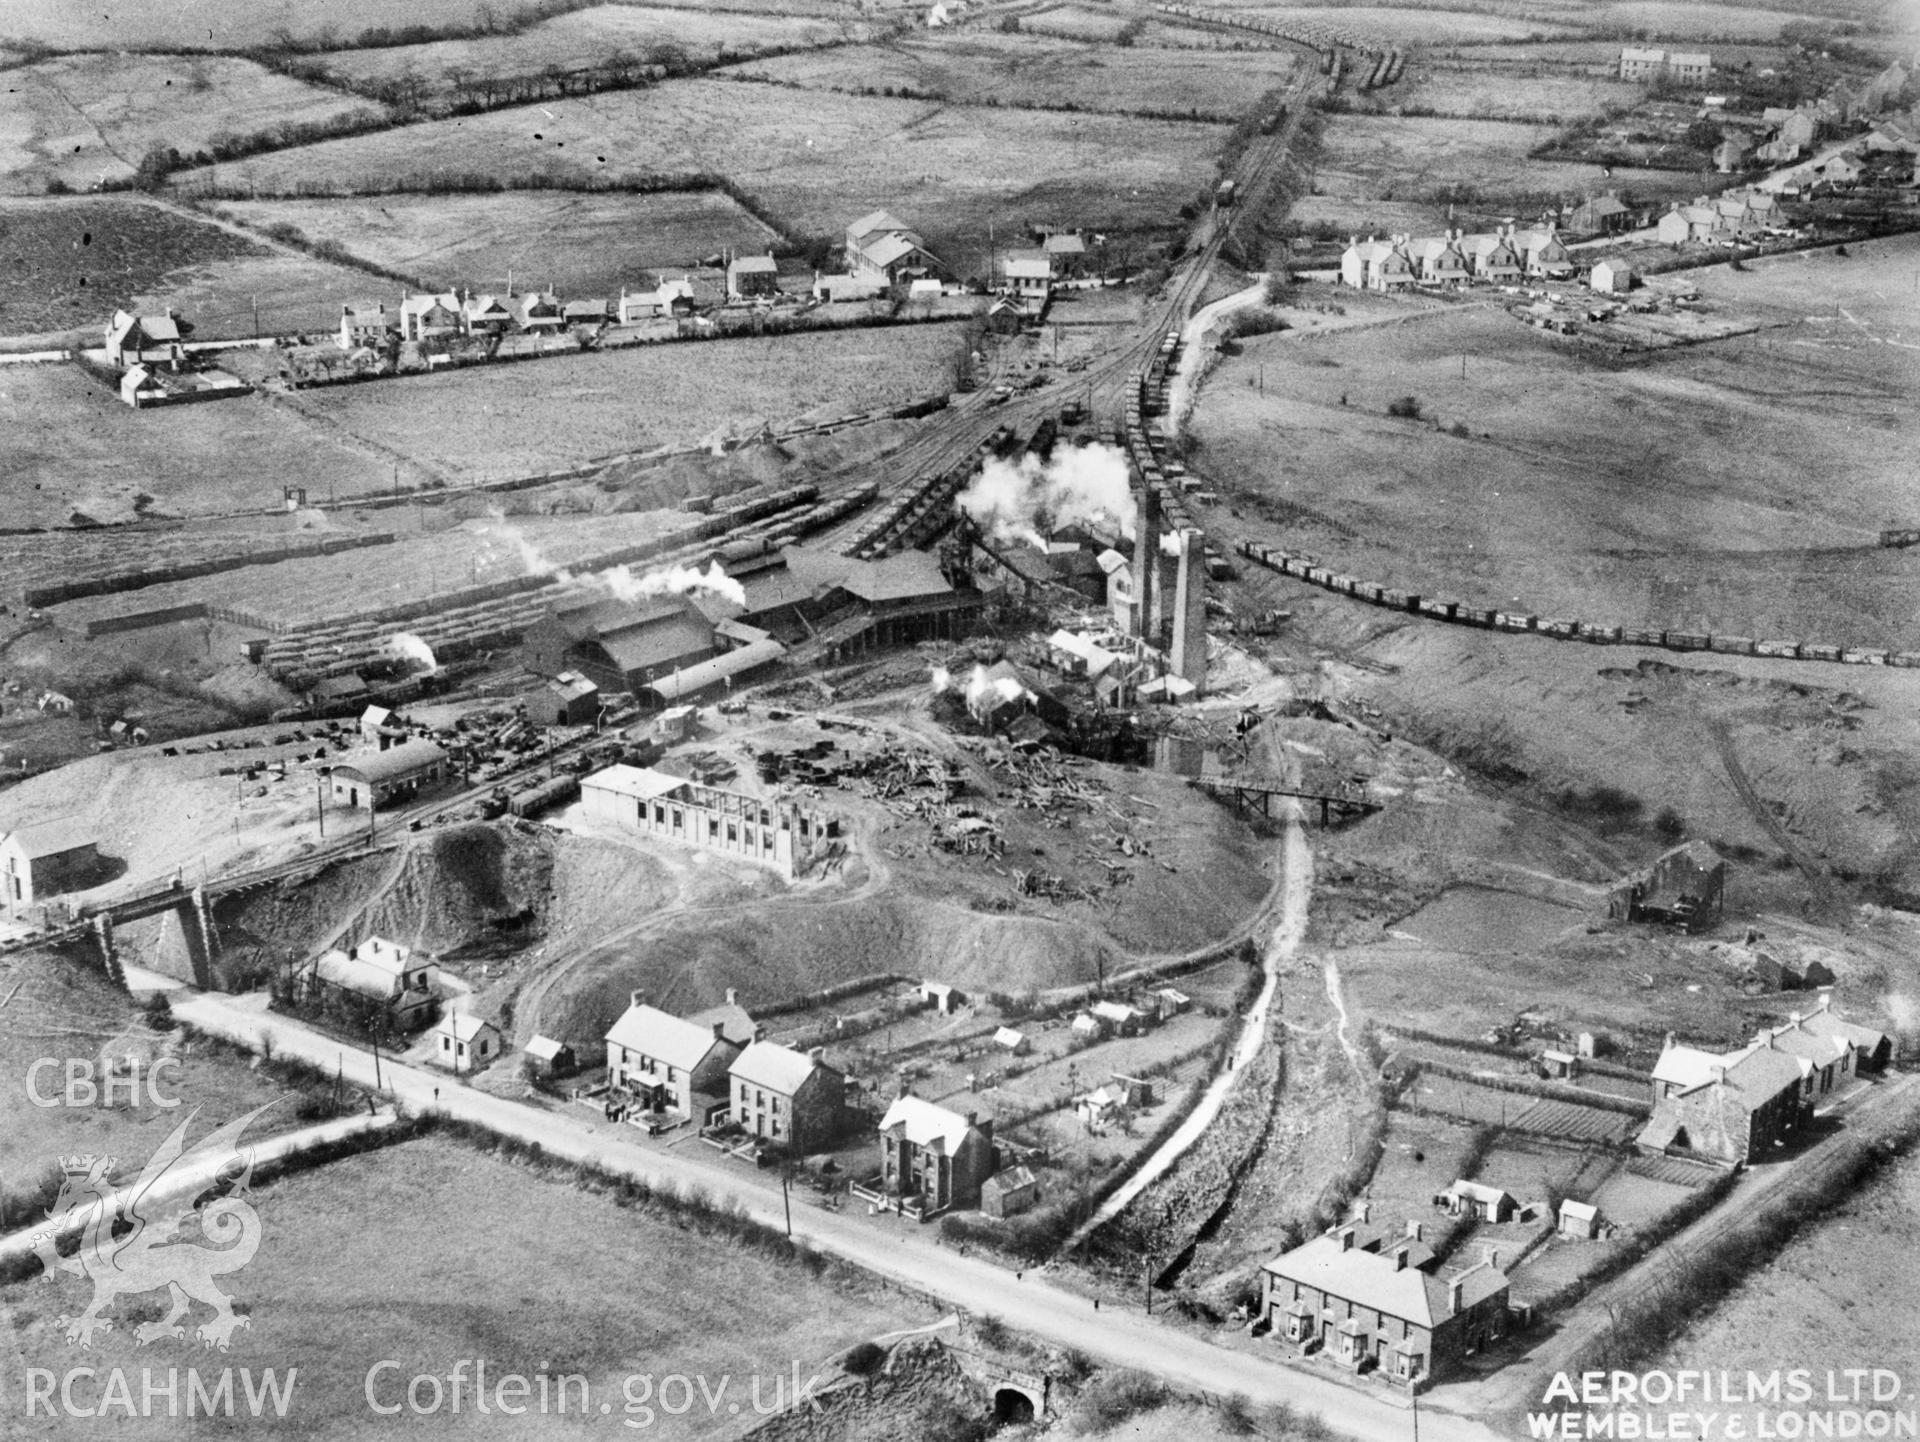 View of Cross Hands showing the New Cross Hands Colliery. Oblique aerial photograph, 5?x4? BW glass plate.